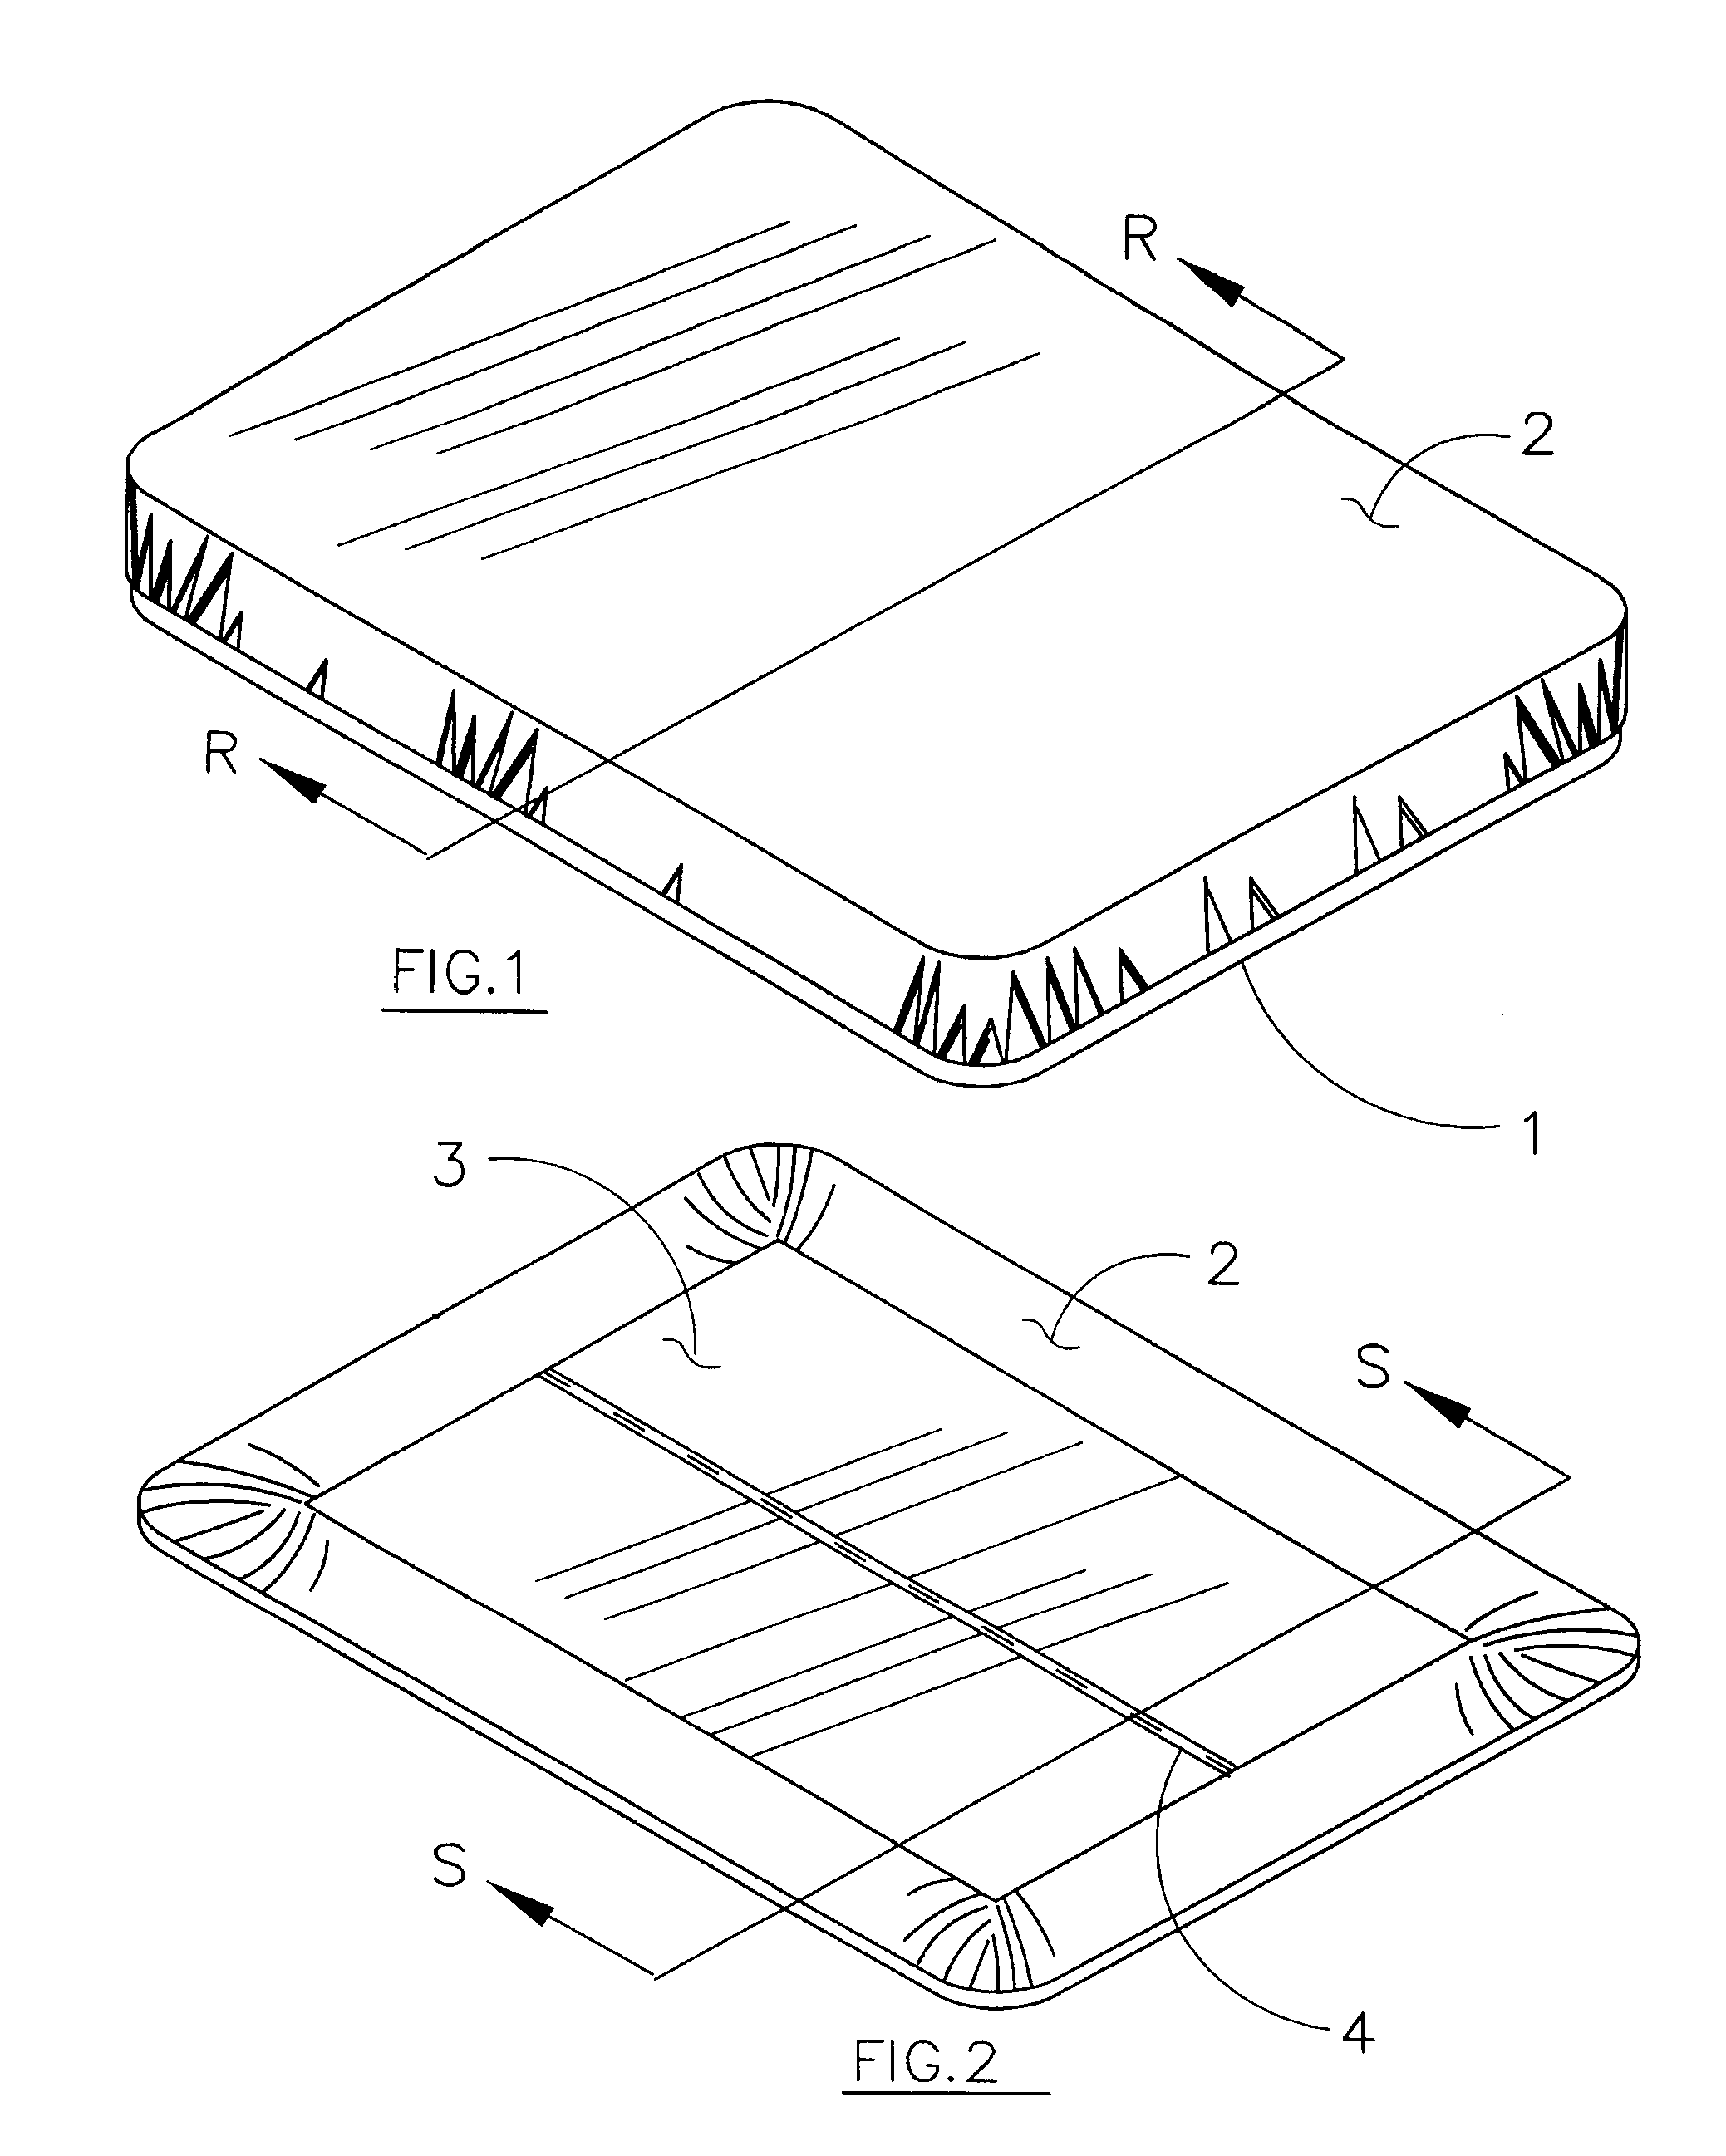 Apparatus for Folding, Stacking and Storing Bedsheets